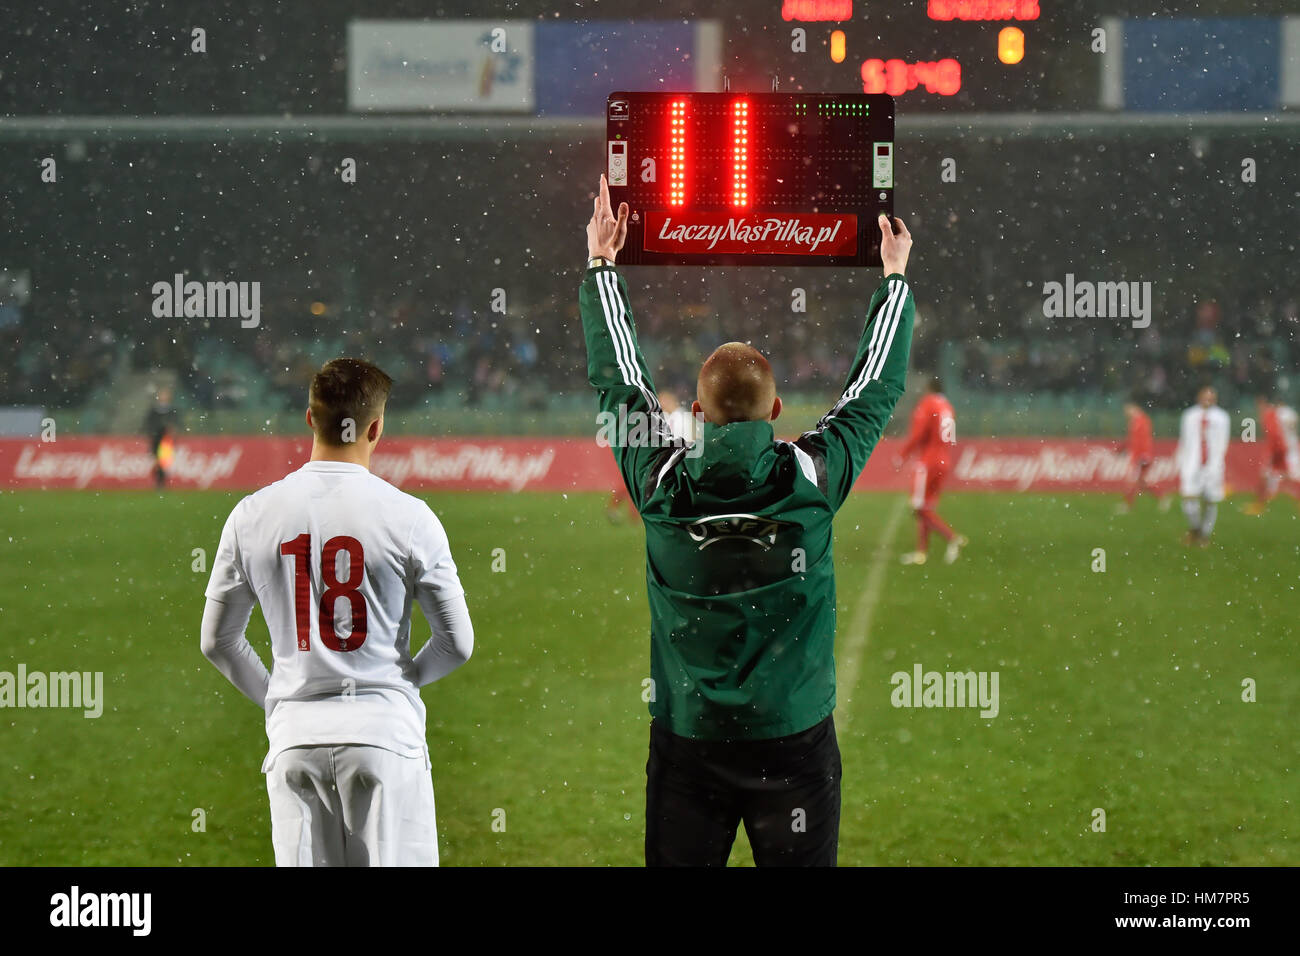 POLKOWICE, POLAND - NOVEMBER 10, 2016: Four Nations Tournament U20 national team youth match Poland - Switzerland 2:0. Referee shows substitution play Stock Photo